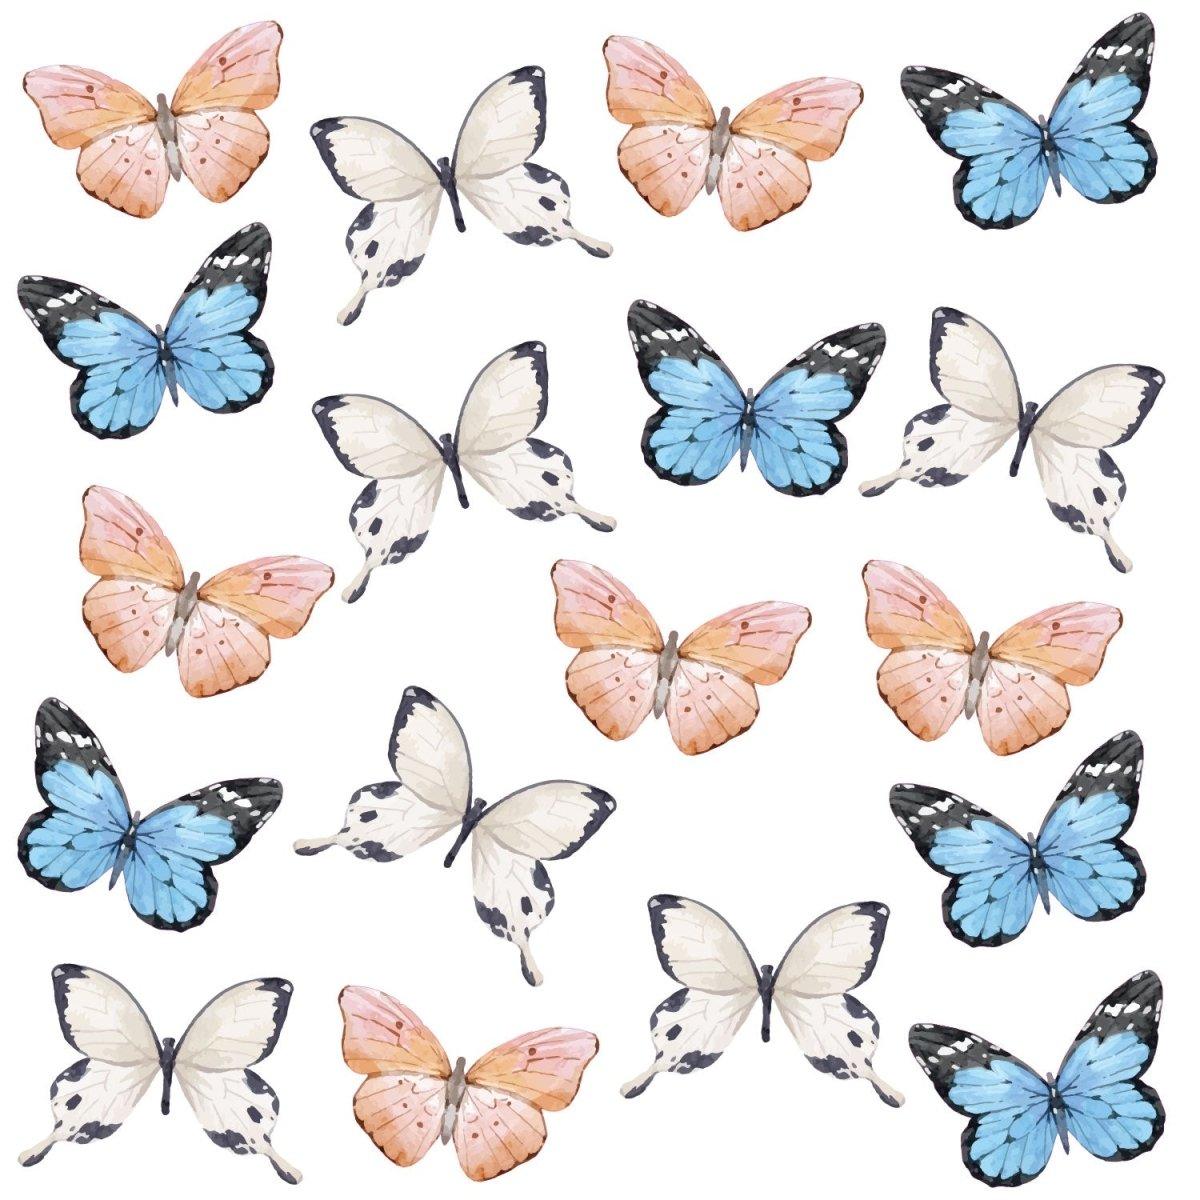 Mixed Colour Butterfly Wall Decals - Printibly